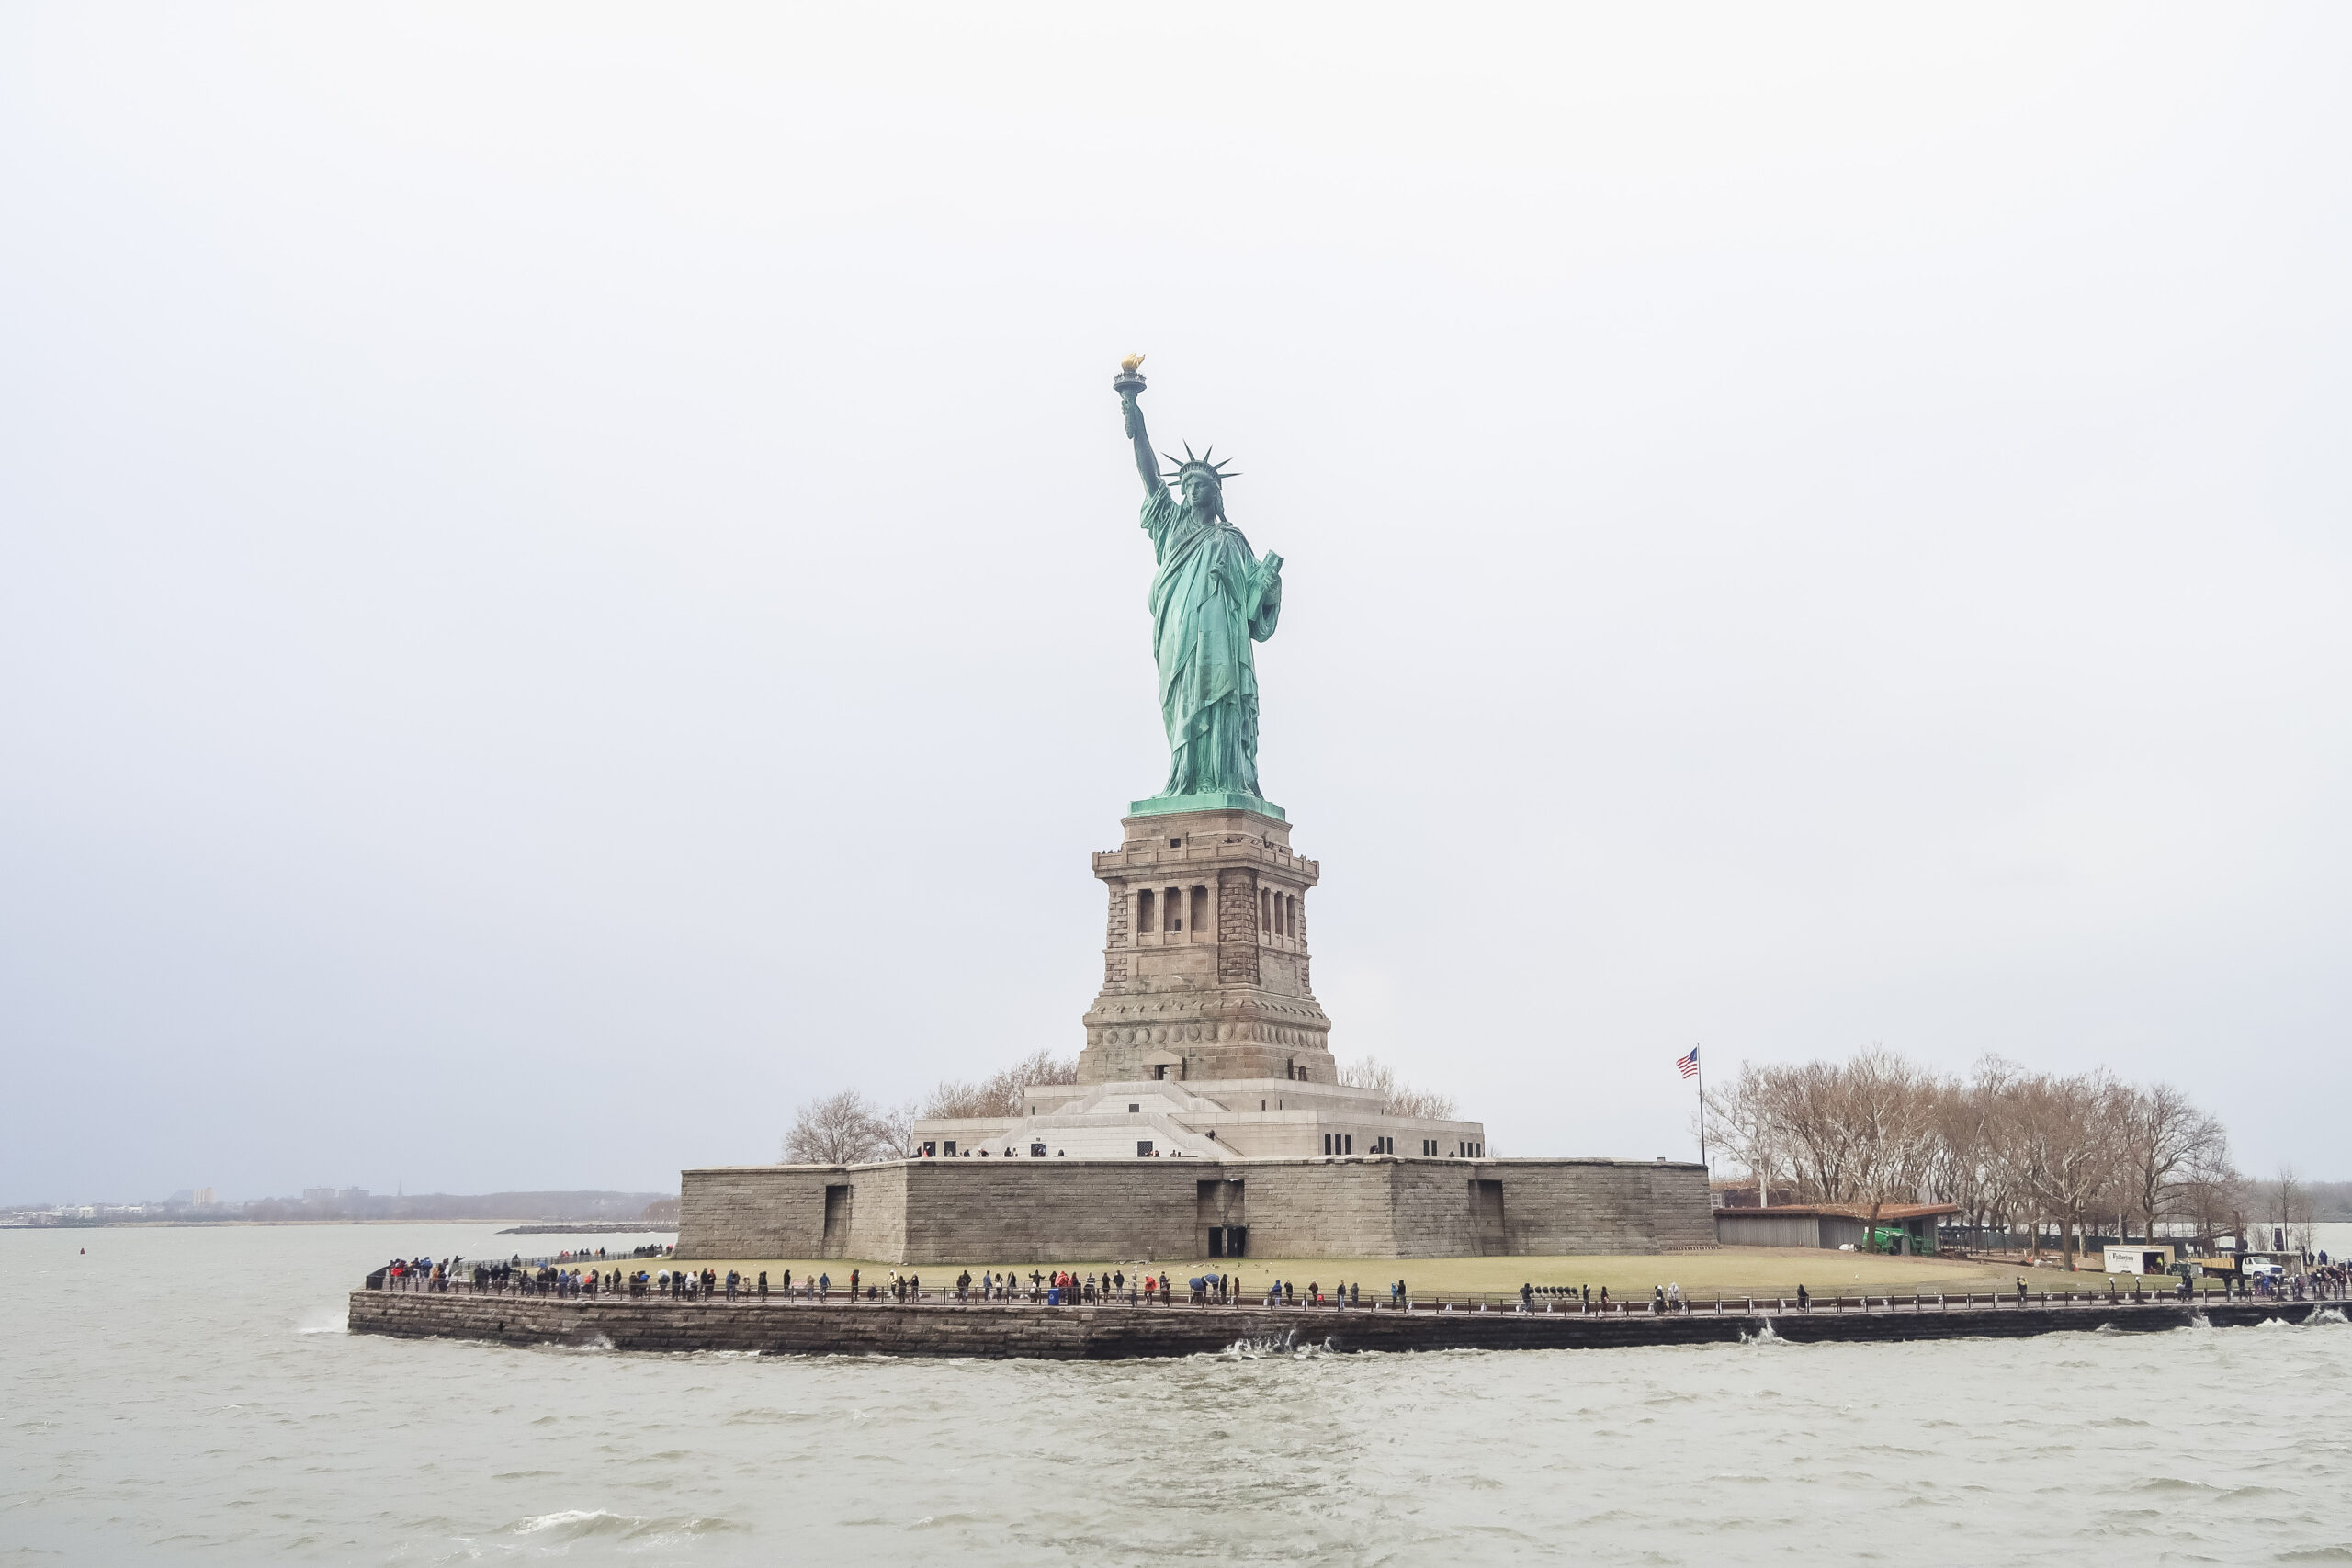 Statue of Liberty | Looking for alternative things to do in New York as a tourist? We visited after previously doing all of the tourist attractions and did New York my way | Travel Guide | The Social Media Virgin